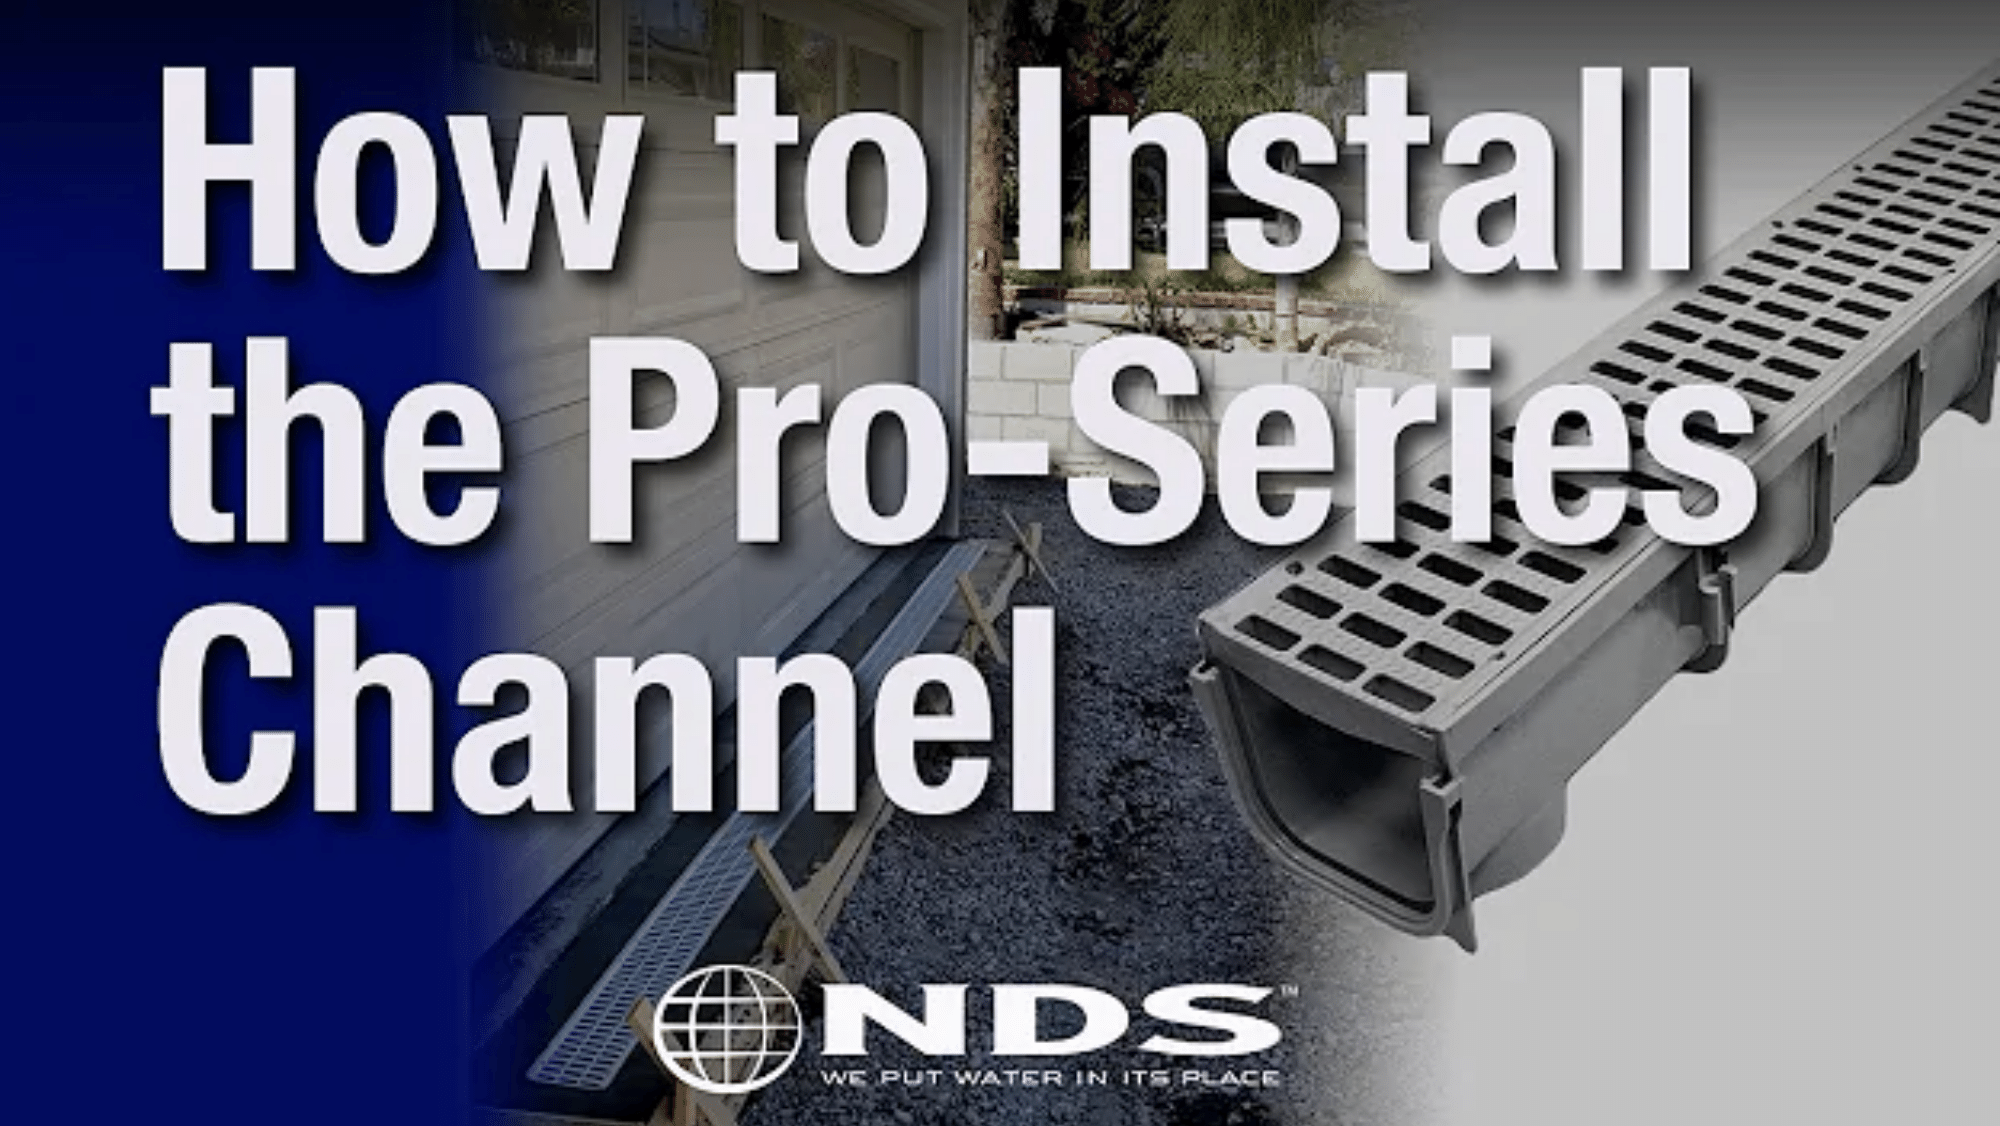 How do I install an NDS Pro Series channel drain?